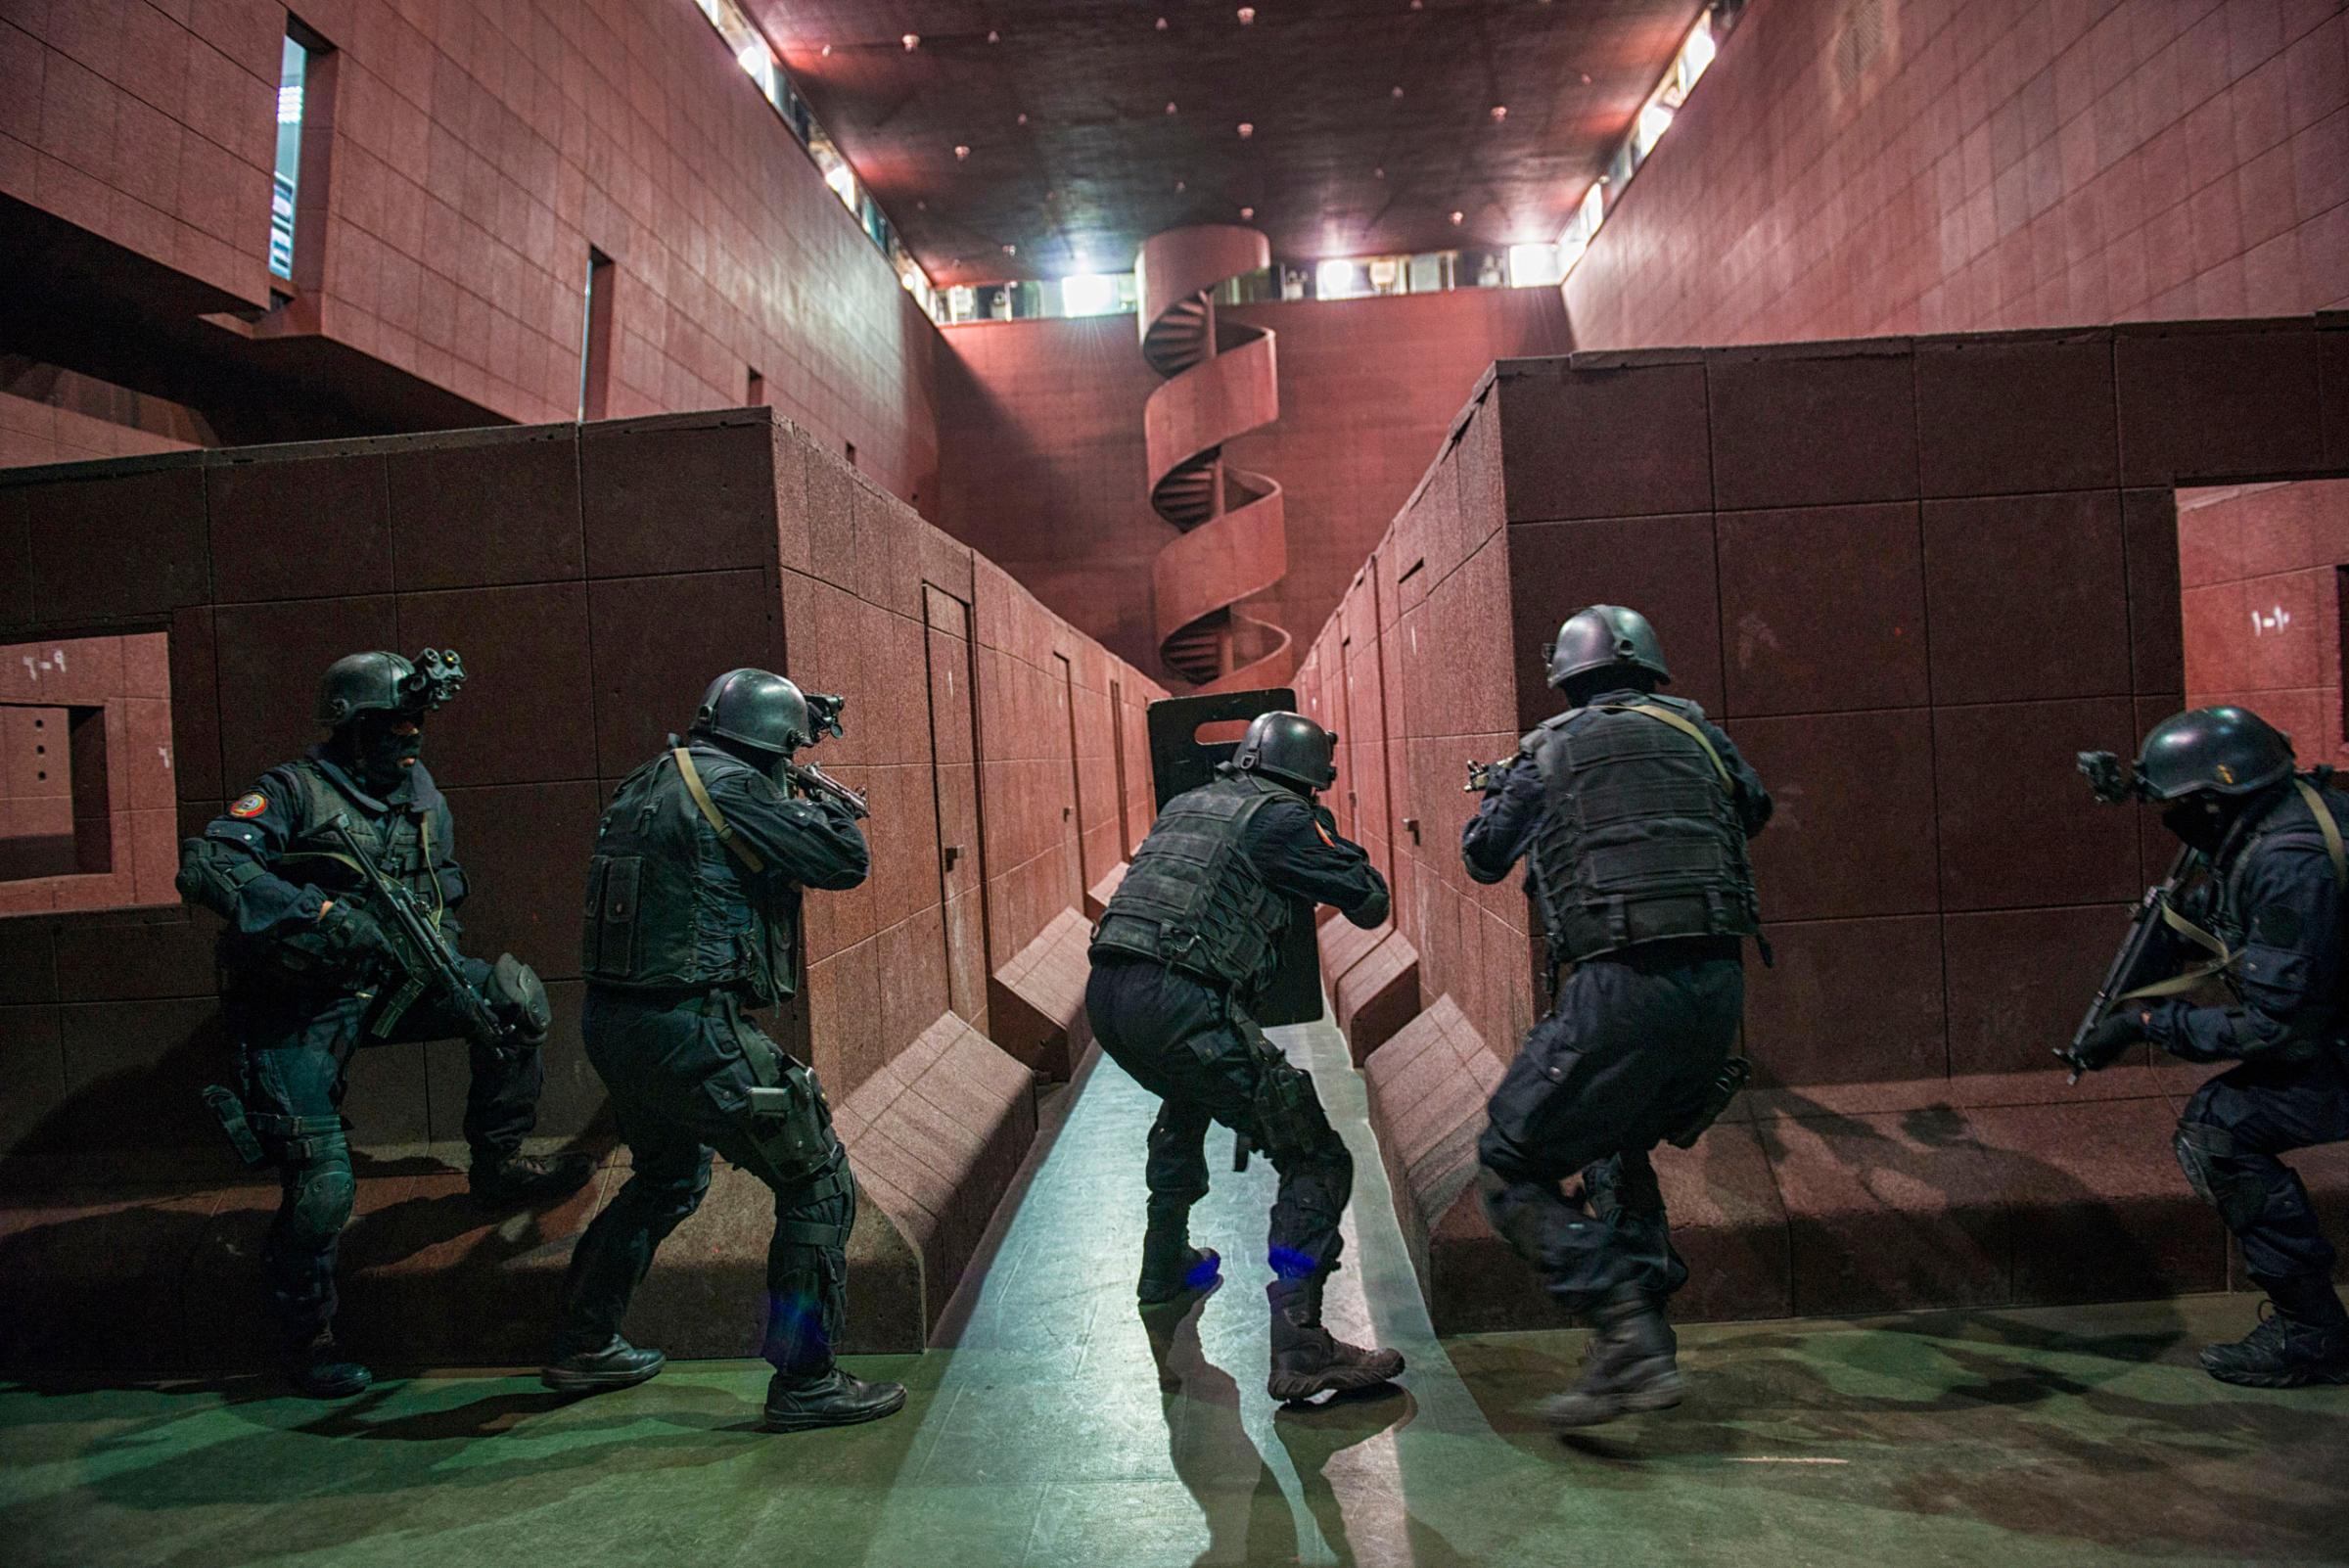 Saudi Special Security Forces perform a simulated raid on a terrorist compound at an indoor shooting range at the Counter-Terrorism Training School camp under the Ministry of Interior in Riyadh, Saudi Arabia, March 5, 2013.  The Saudi government has been fighting terrorism within the Kingdom for decades, and has roughly 3,000 SEF in Riyadh, alone.  Despite a fraugh relationship with the United States in the past, Saudi Arabia and the U.S. have routinely shared security information in order to prevent and fight terrorism.  With the recent death of HRH King Abdullah, the international community is looking to the newly appointed HRH King Salman to see how he develop the Kingdom's relationship with the West.  (Credit: Lynsey Addario/ Getty Reportage)